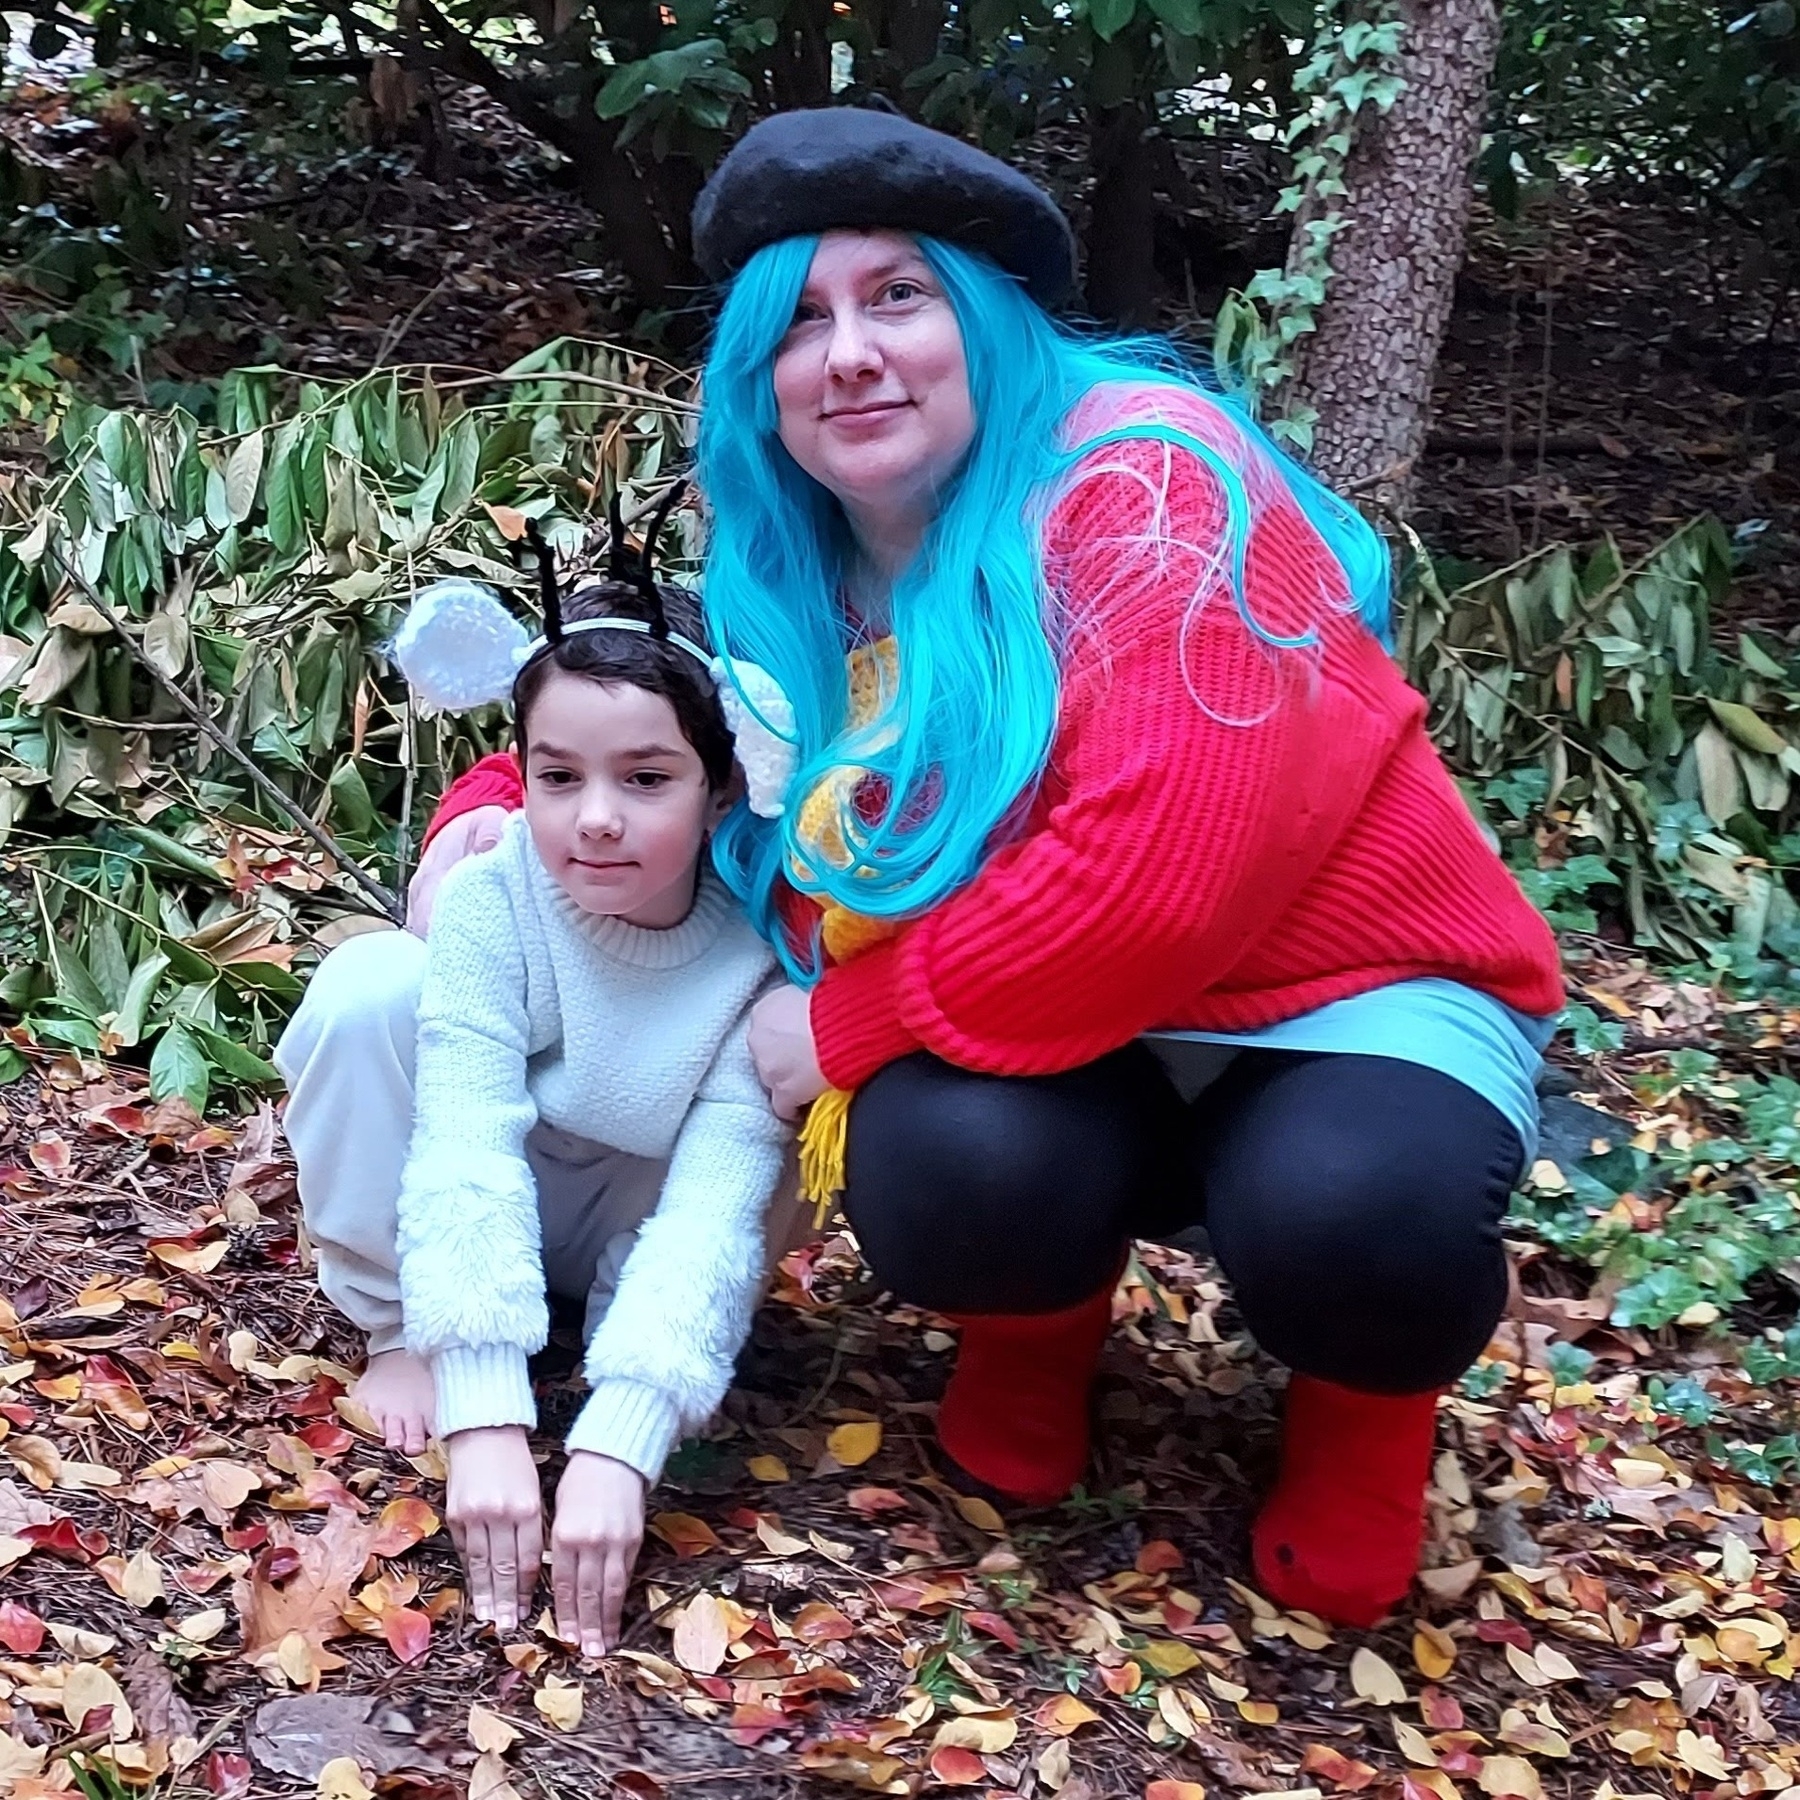 A child dressed as Twig the Deerfox and an adult dressed as Hilda, both from the Hildafolk graphic novels and Hilda Netflix series